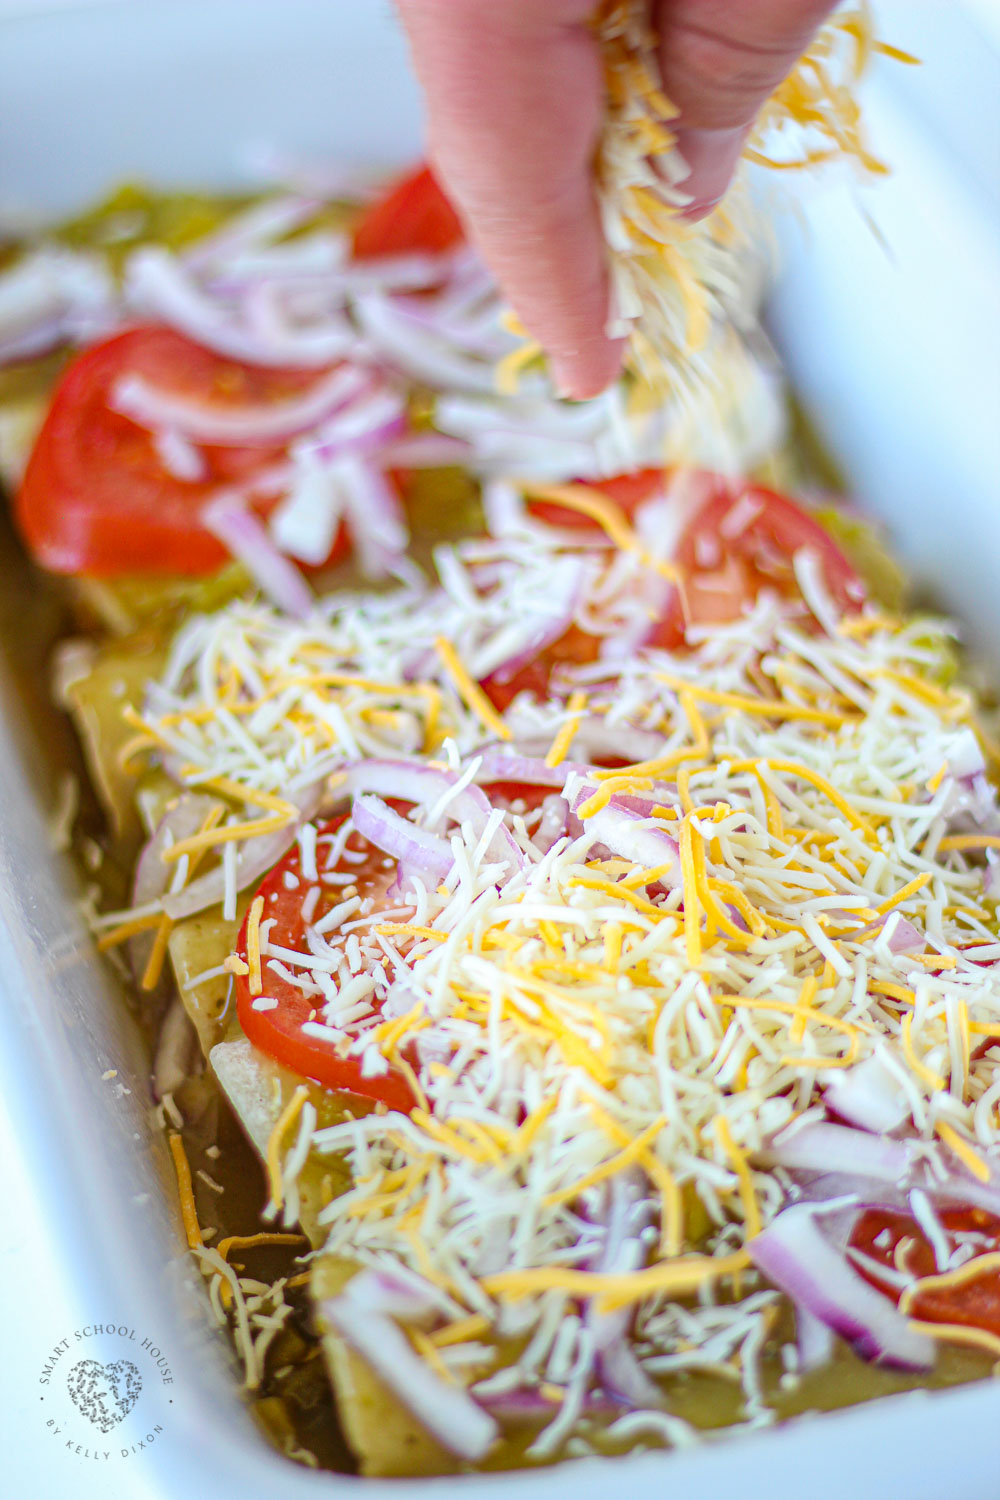 These cheese enchiladas are made even better with the addition of the green enchilada sauce. Comfort food at it's best!